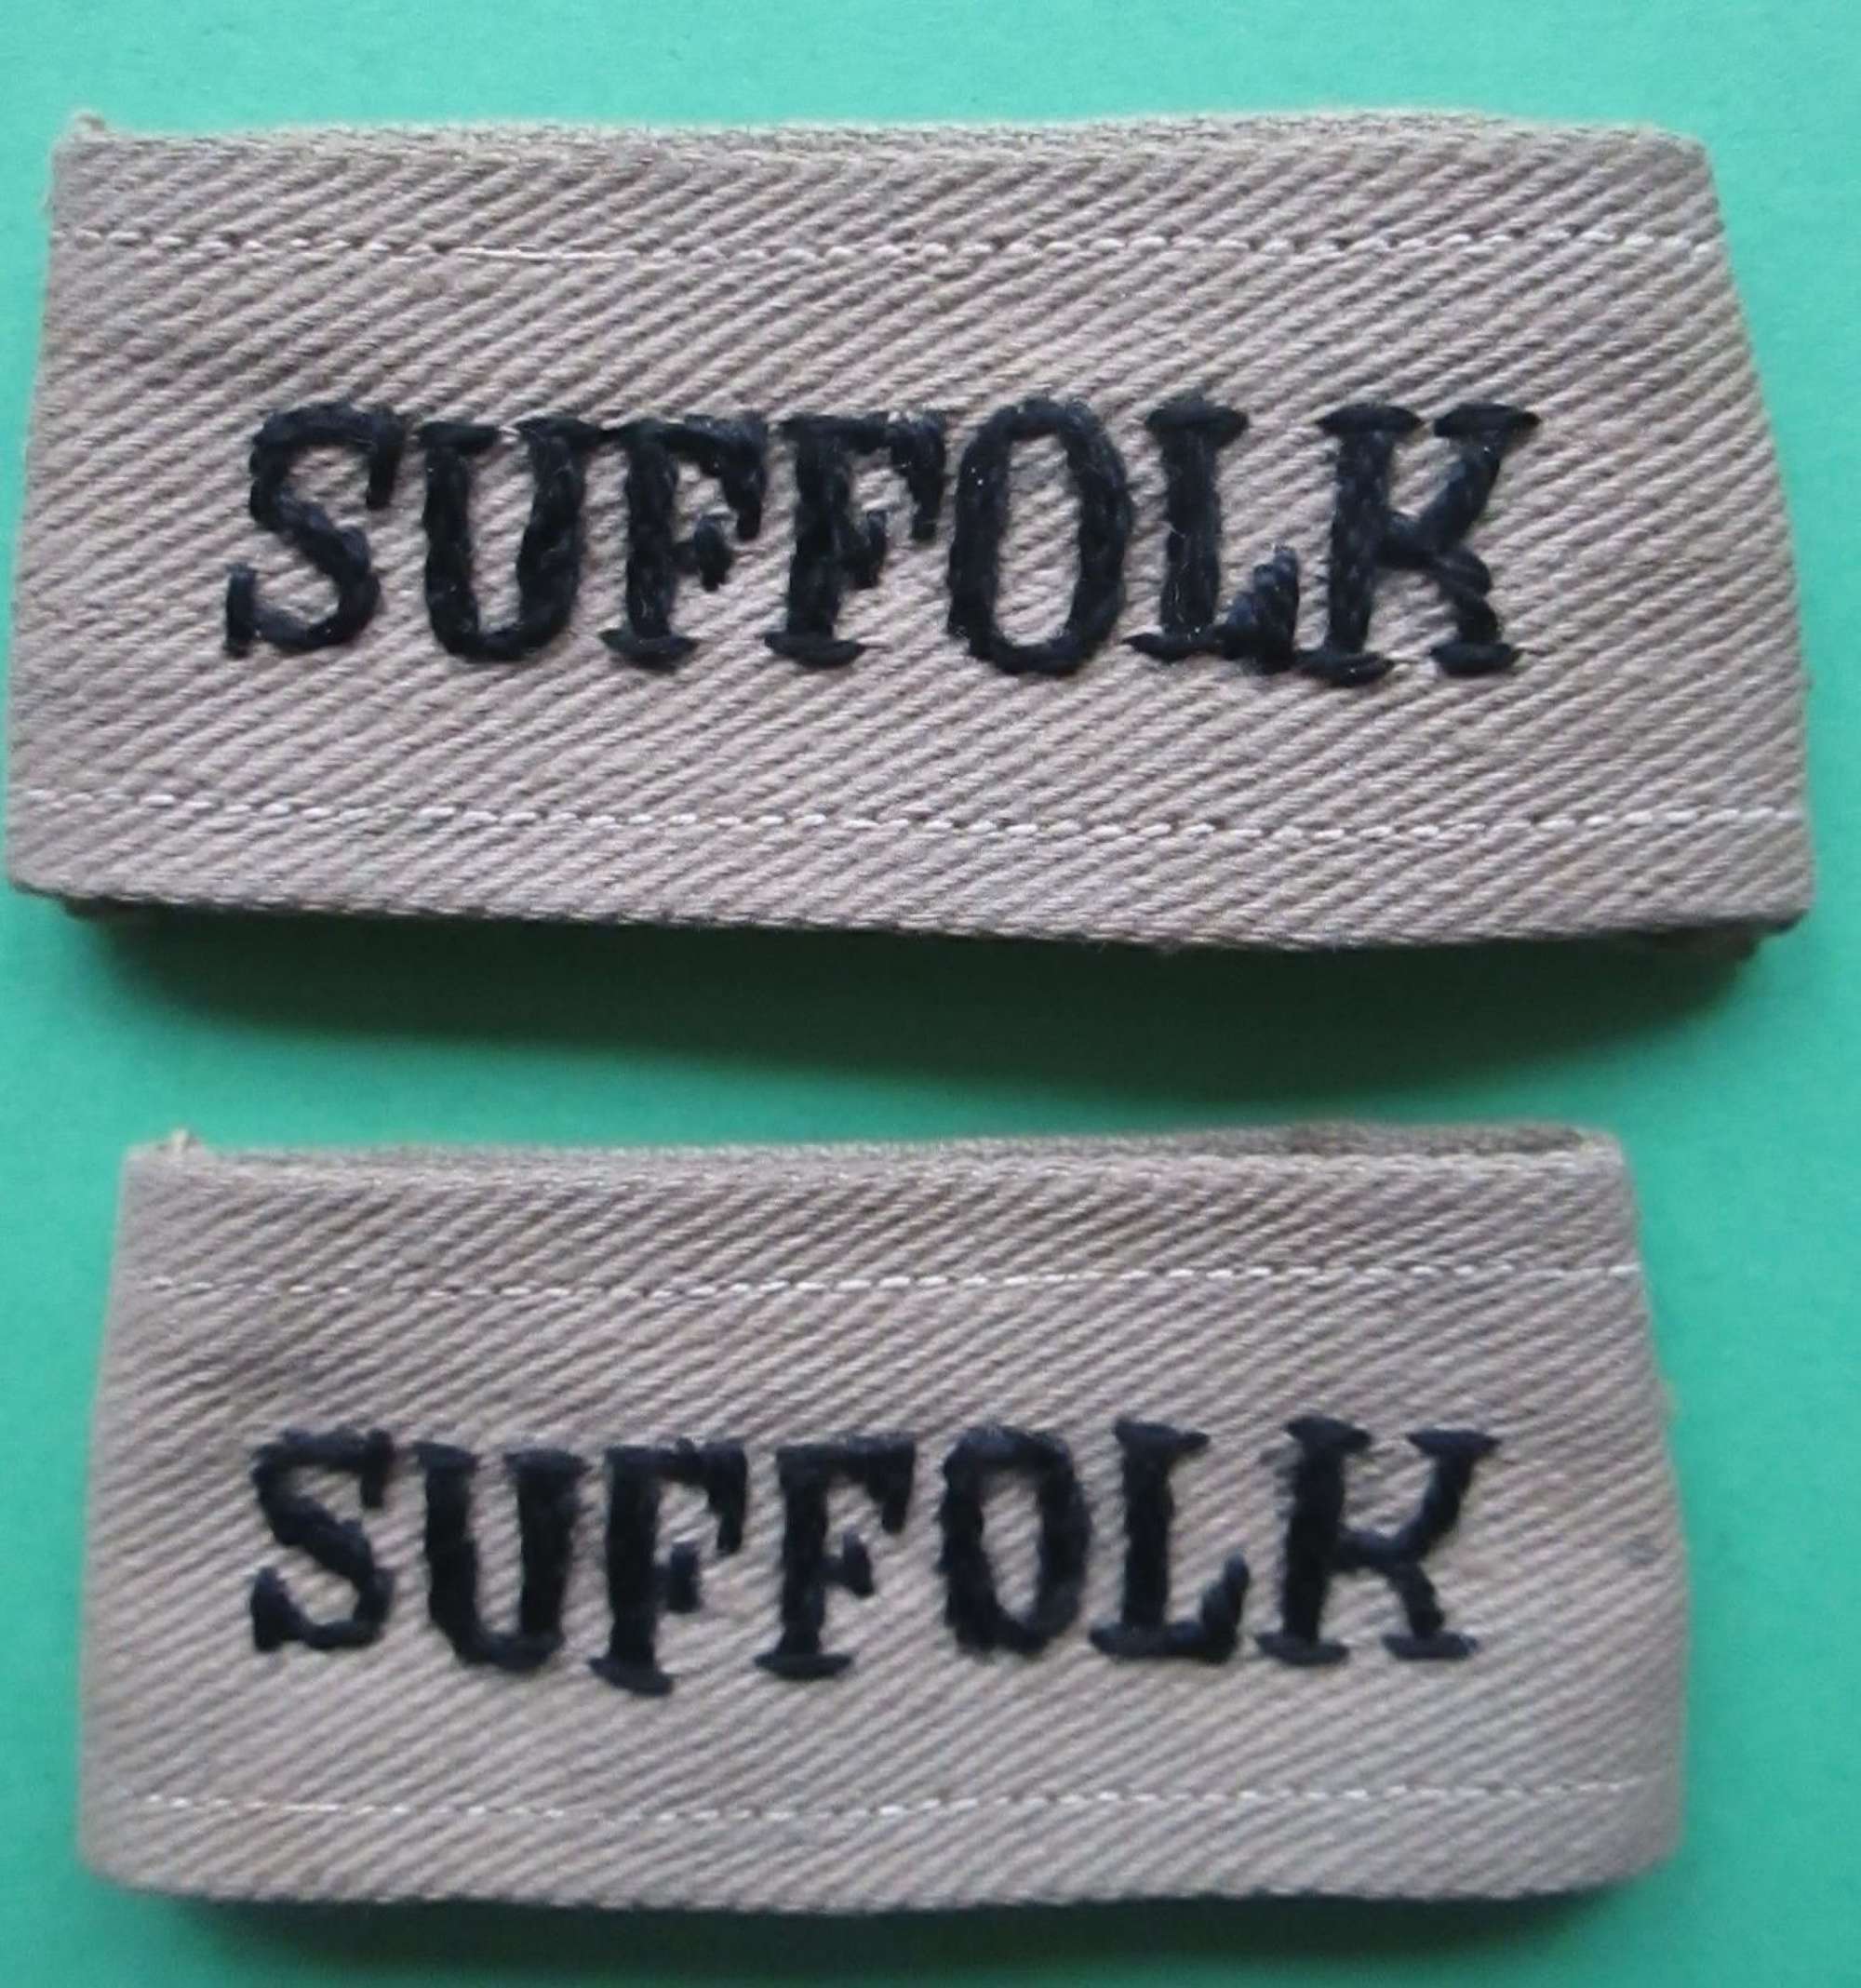 A MATCHING PAIR OF THE TROPICAL SUFFOLK REGT SLIDE ON TITLES